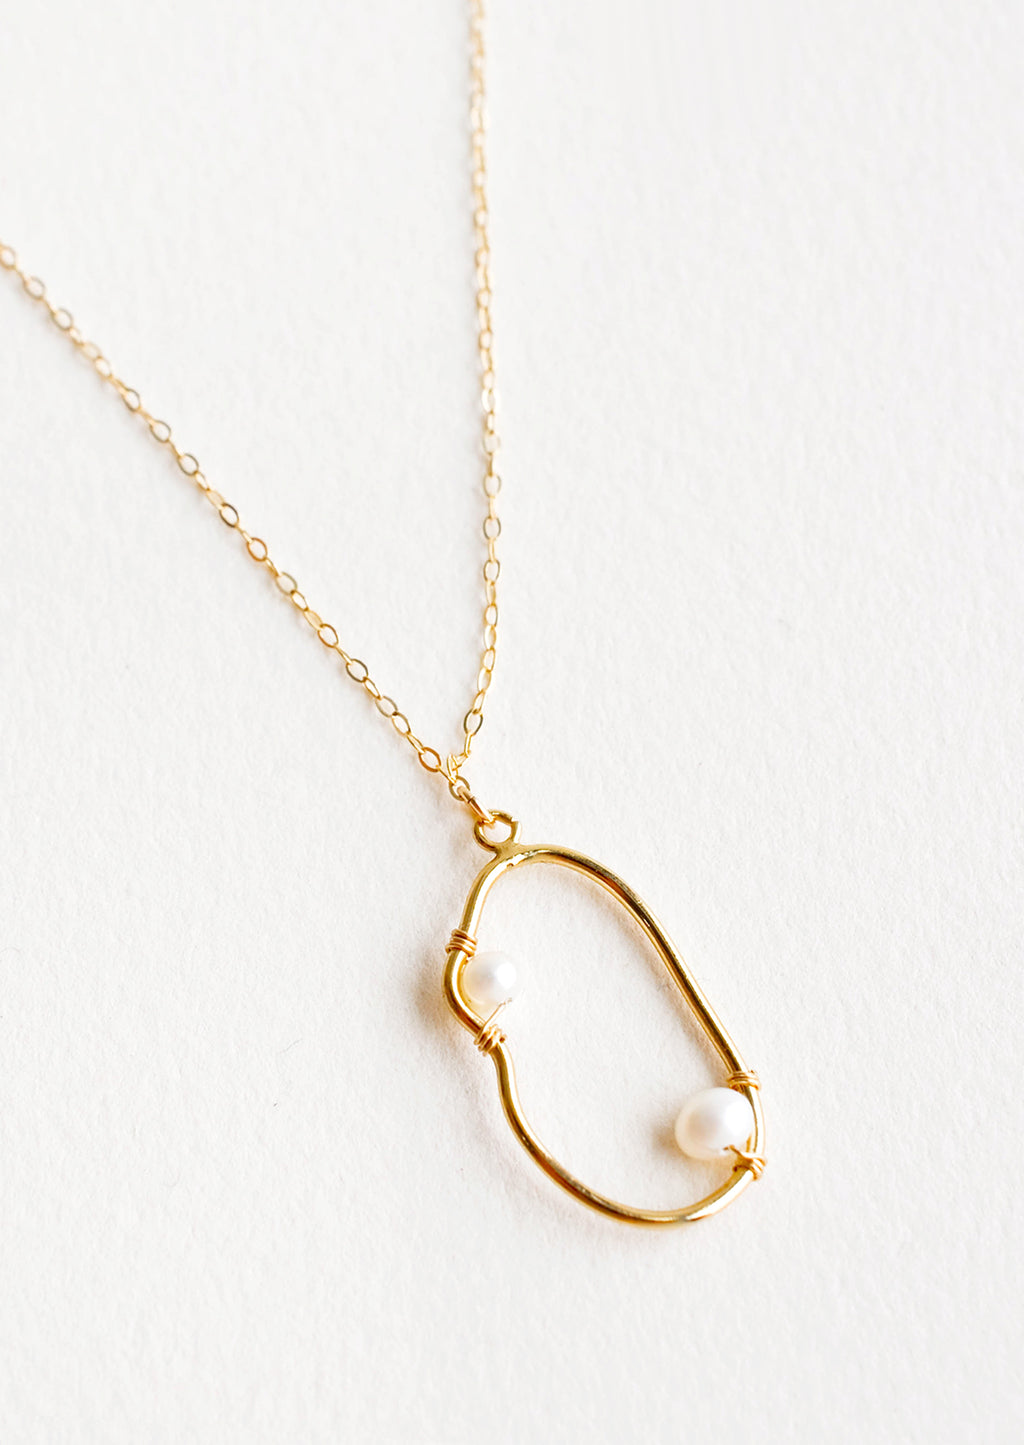 1: Gold necklace with asymmetric round gold charm made from a slim gold hoop, with two pearls attached with wrapped wire.